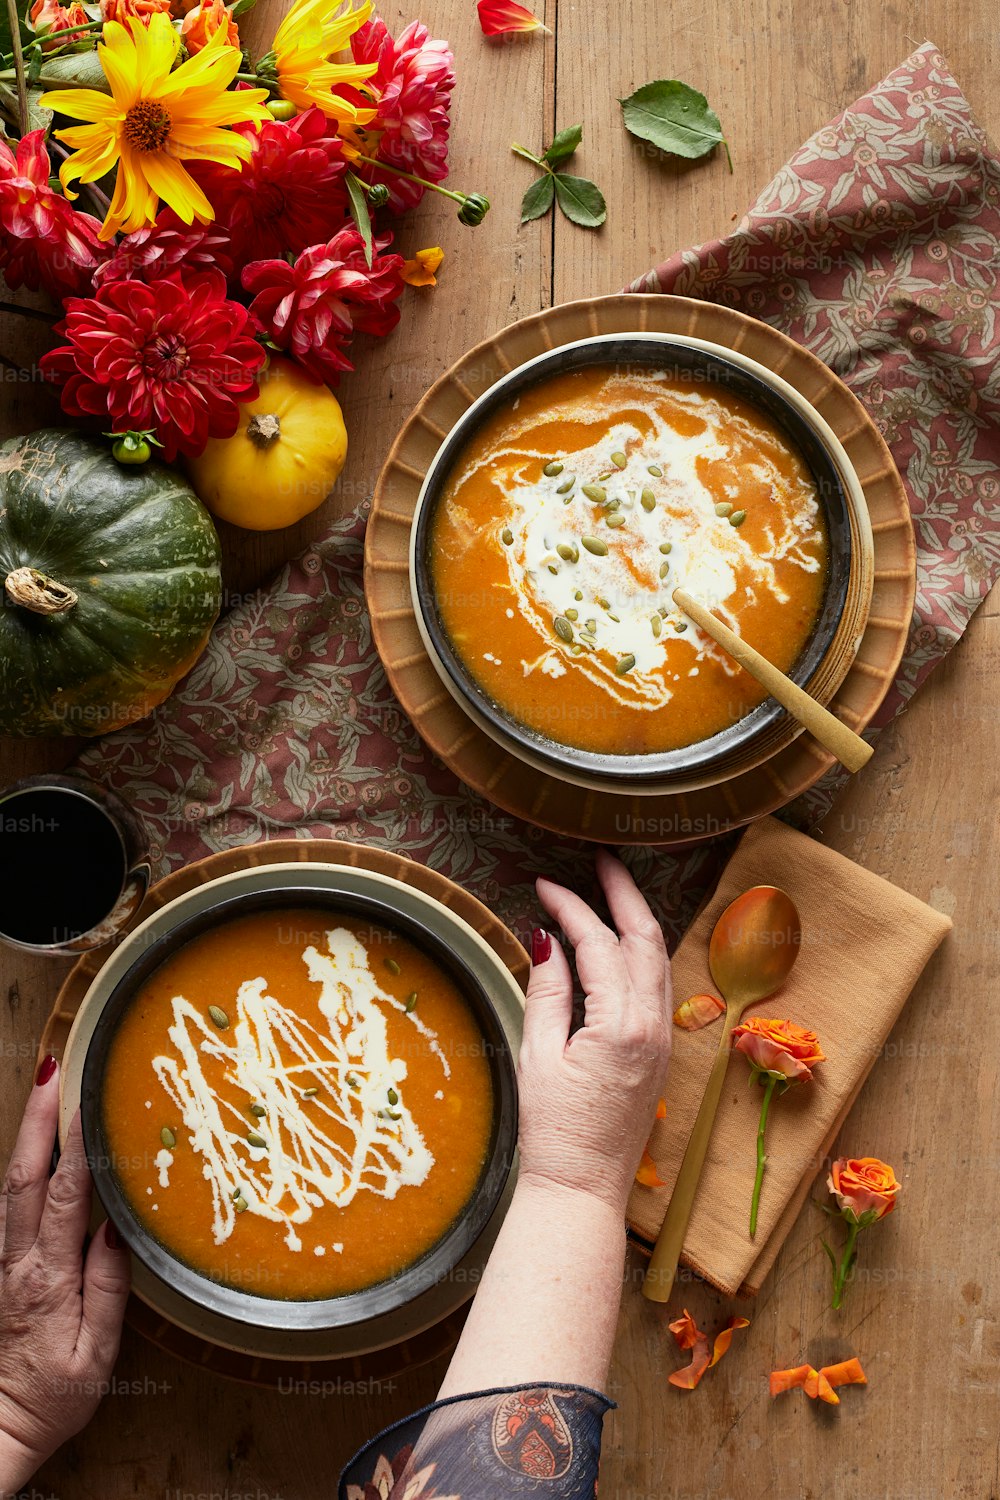 two bowls of carrot soup with a hand reaching for one